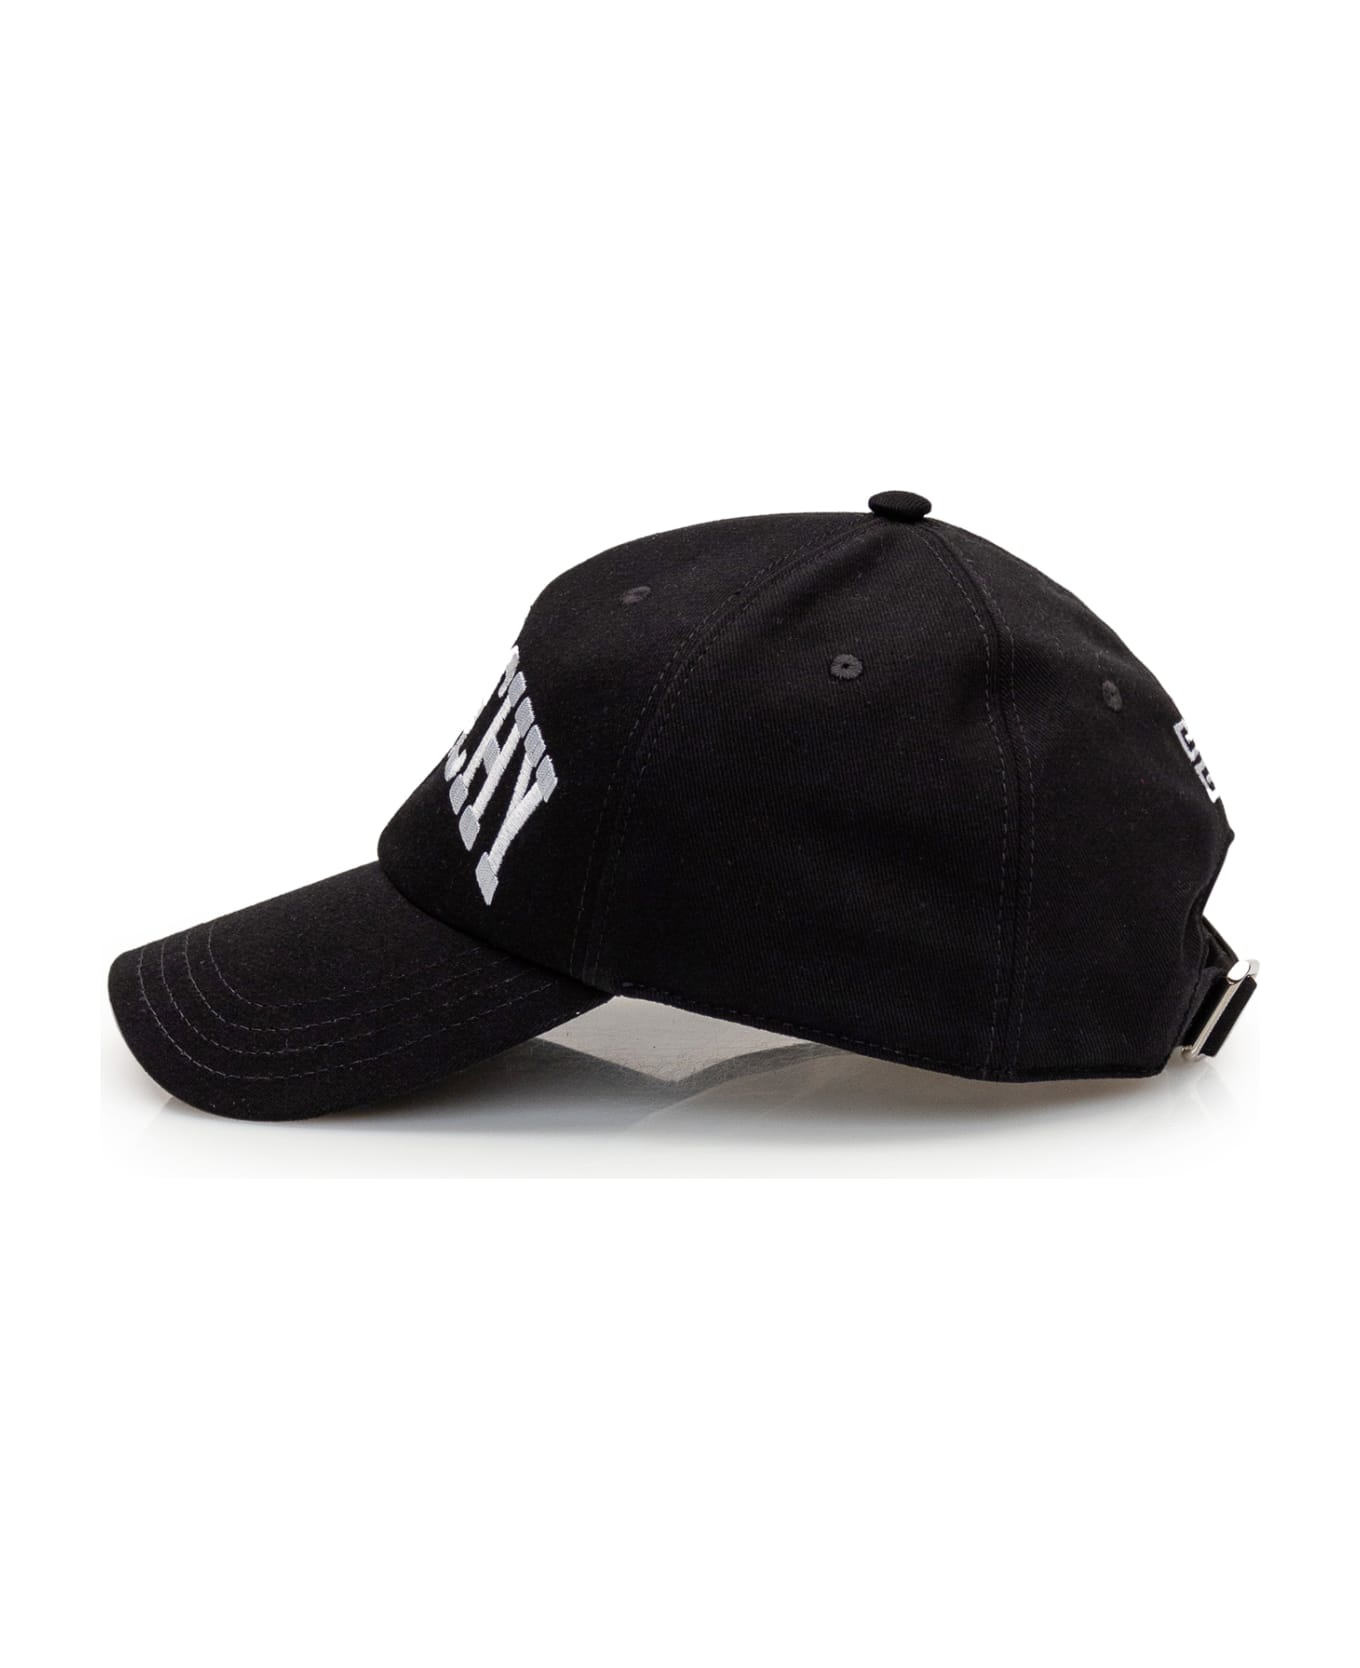 Givenchy Black Baseball Hat With Givenchy College Embroidery - Black 帽子